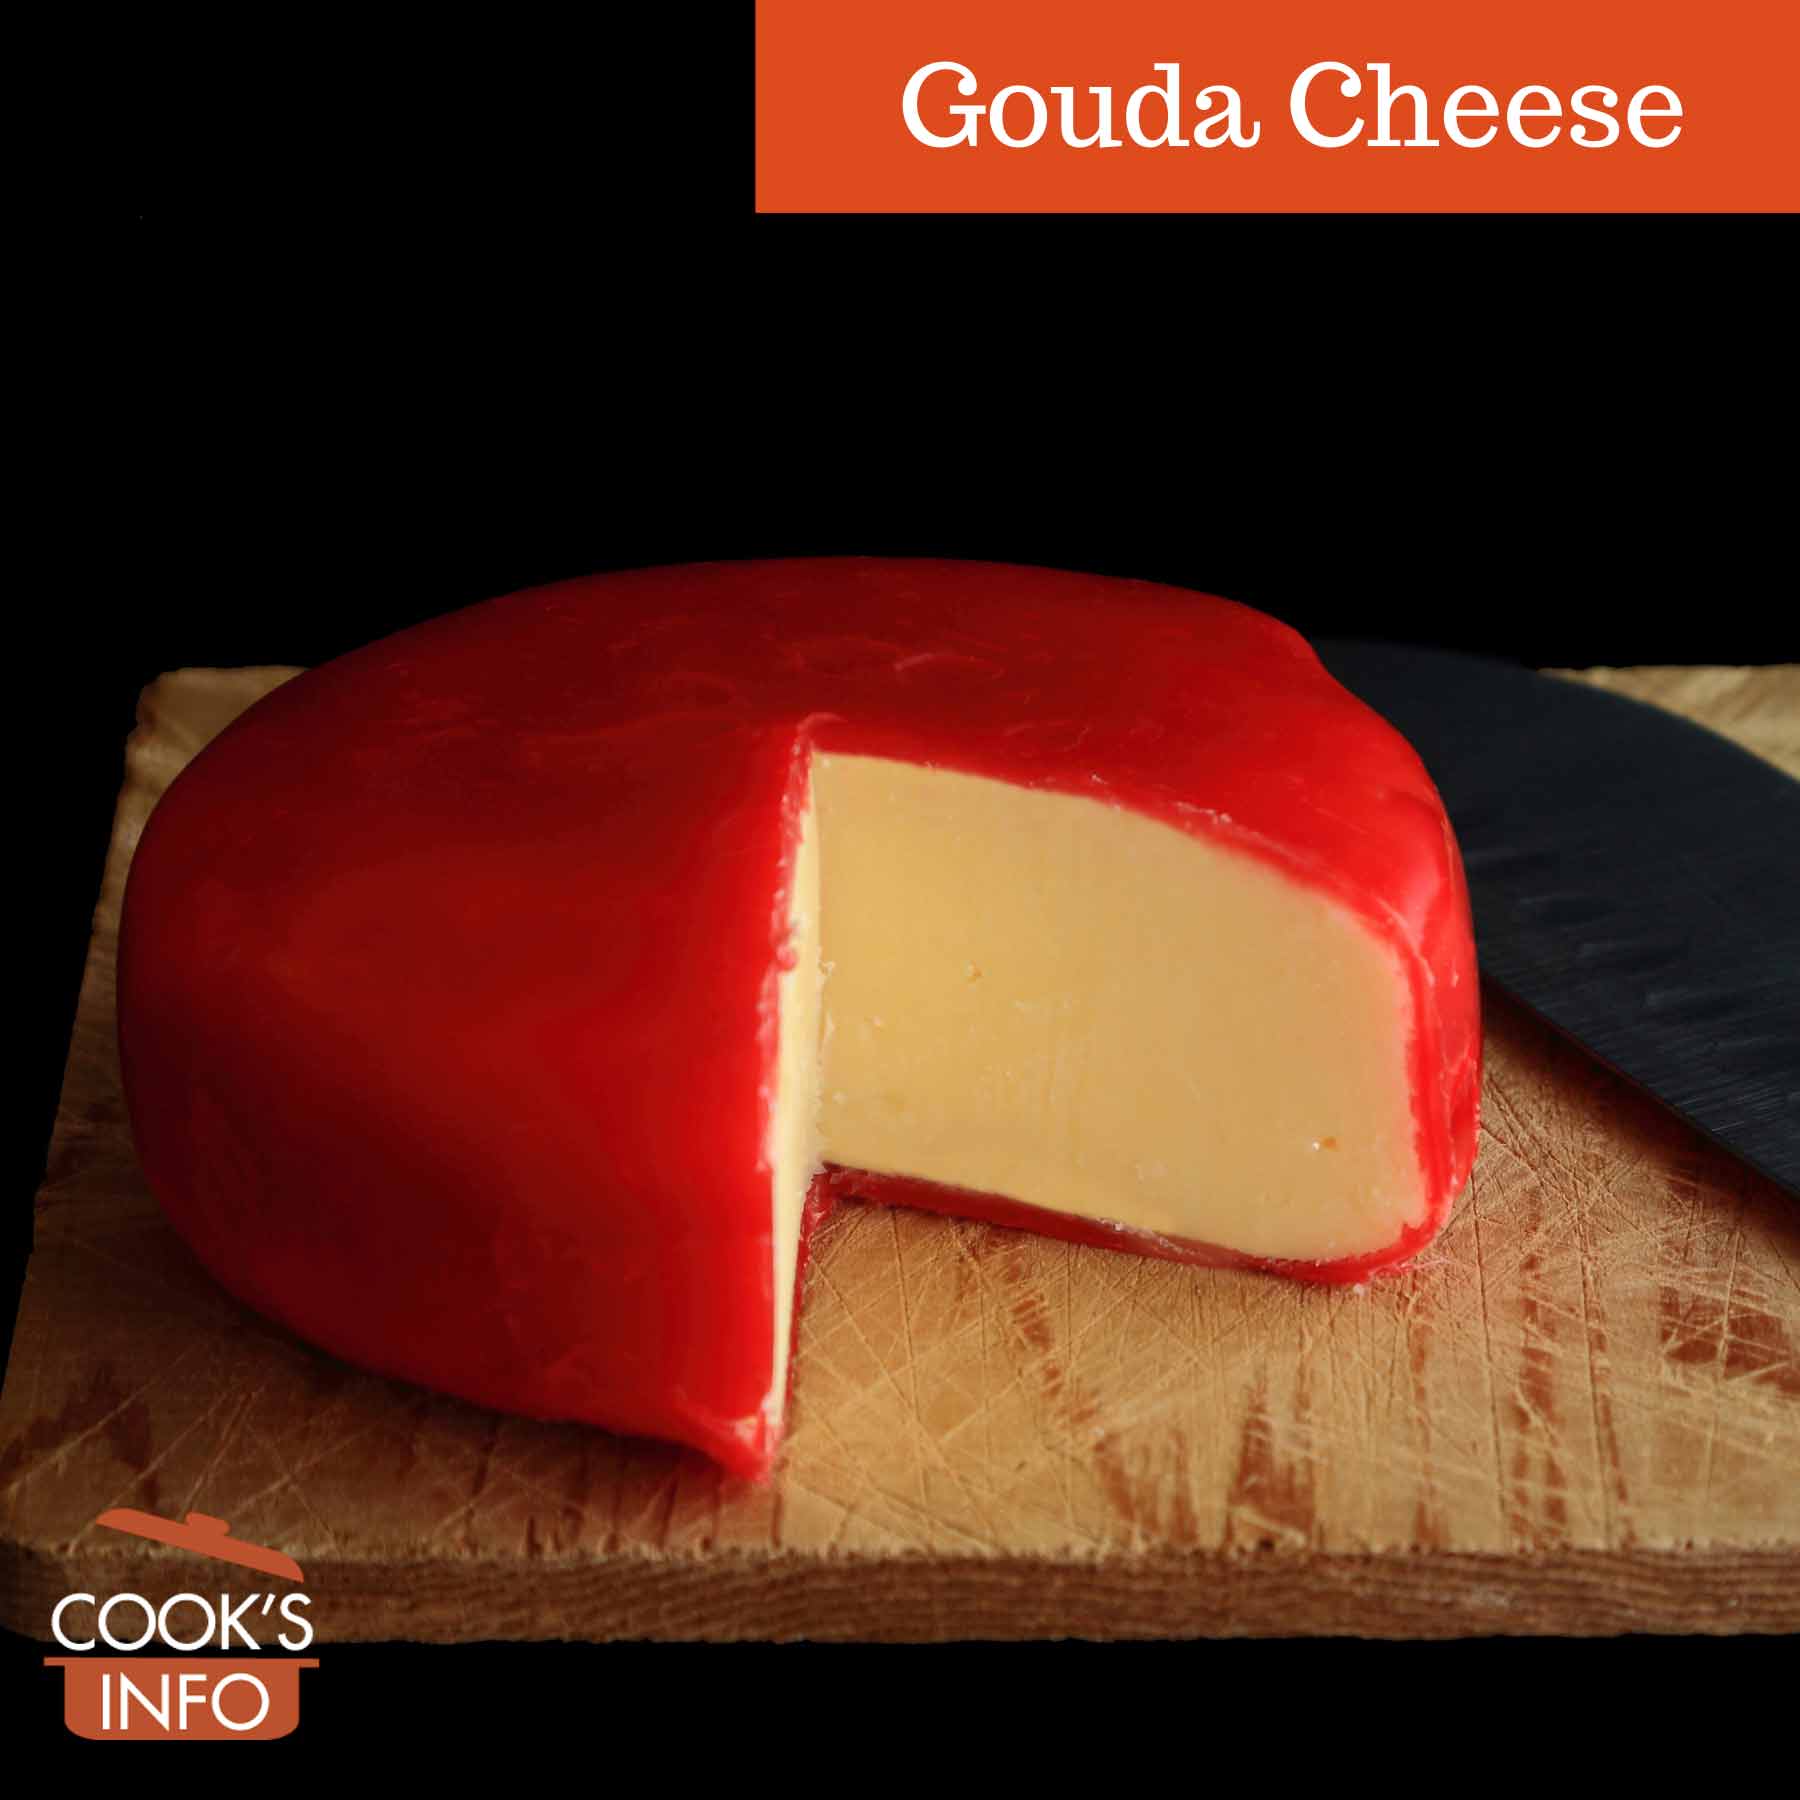 Gouda cheese in red wax